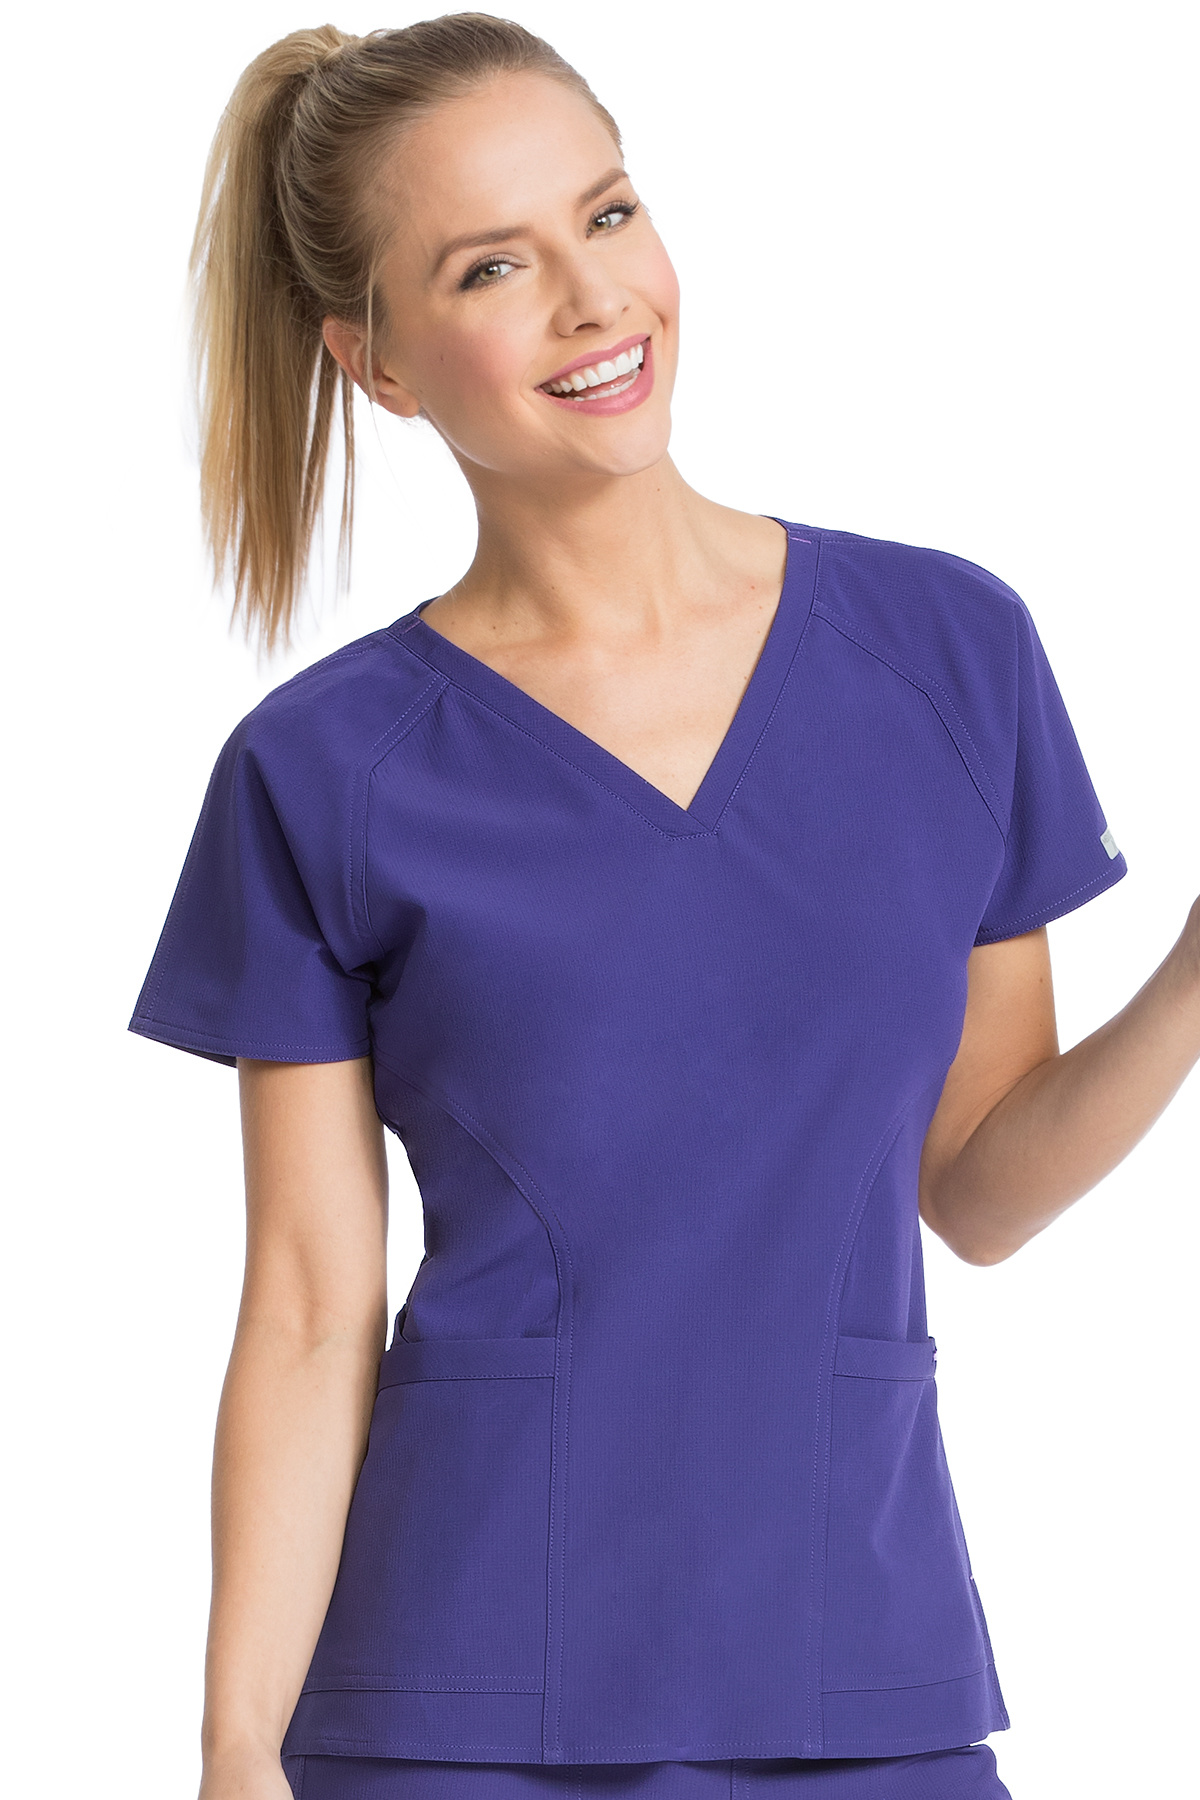 Med Couture Air Women's Spirit V-Neck Top 8561 - CSE Mobility and Scrubs